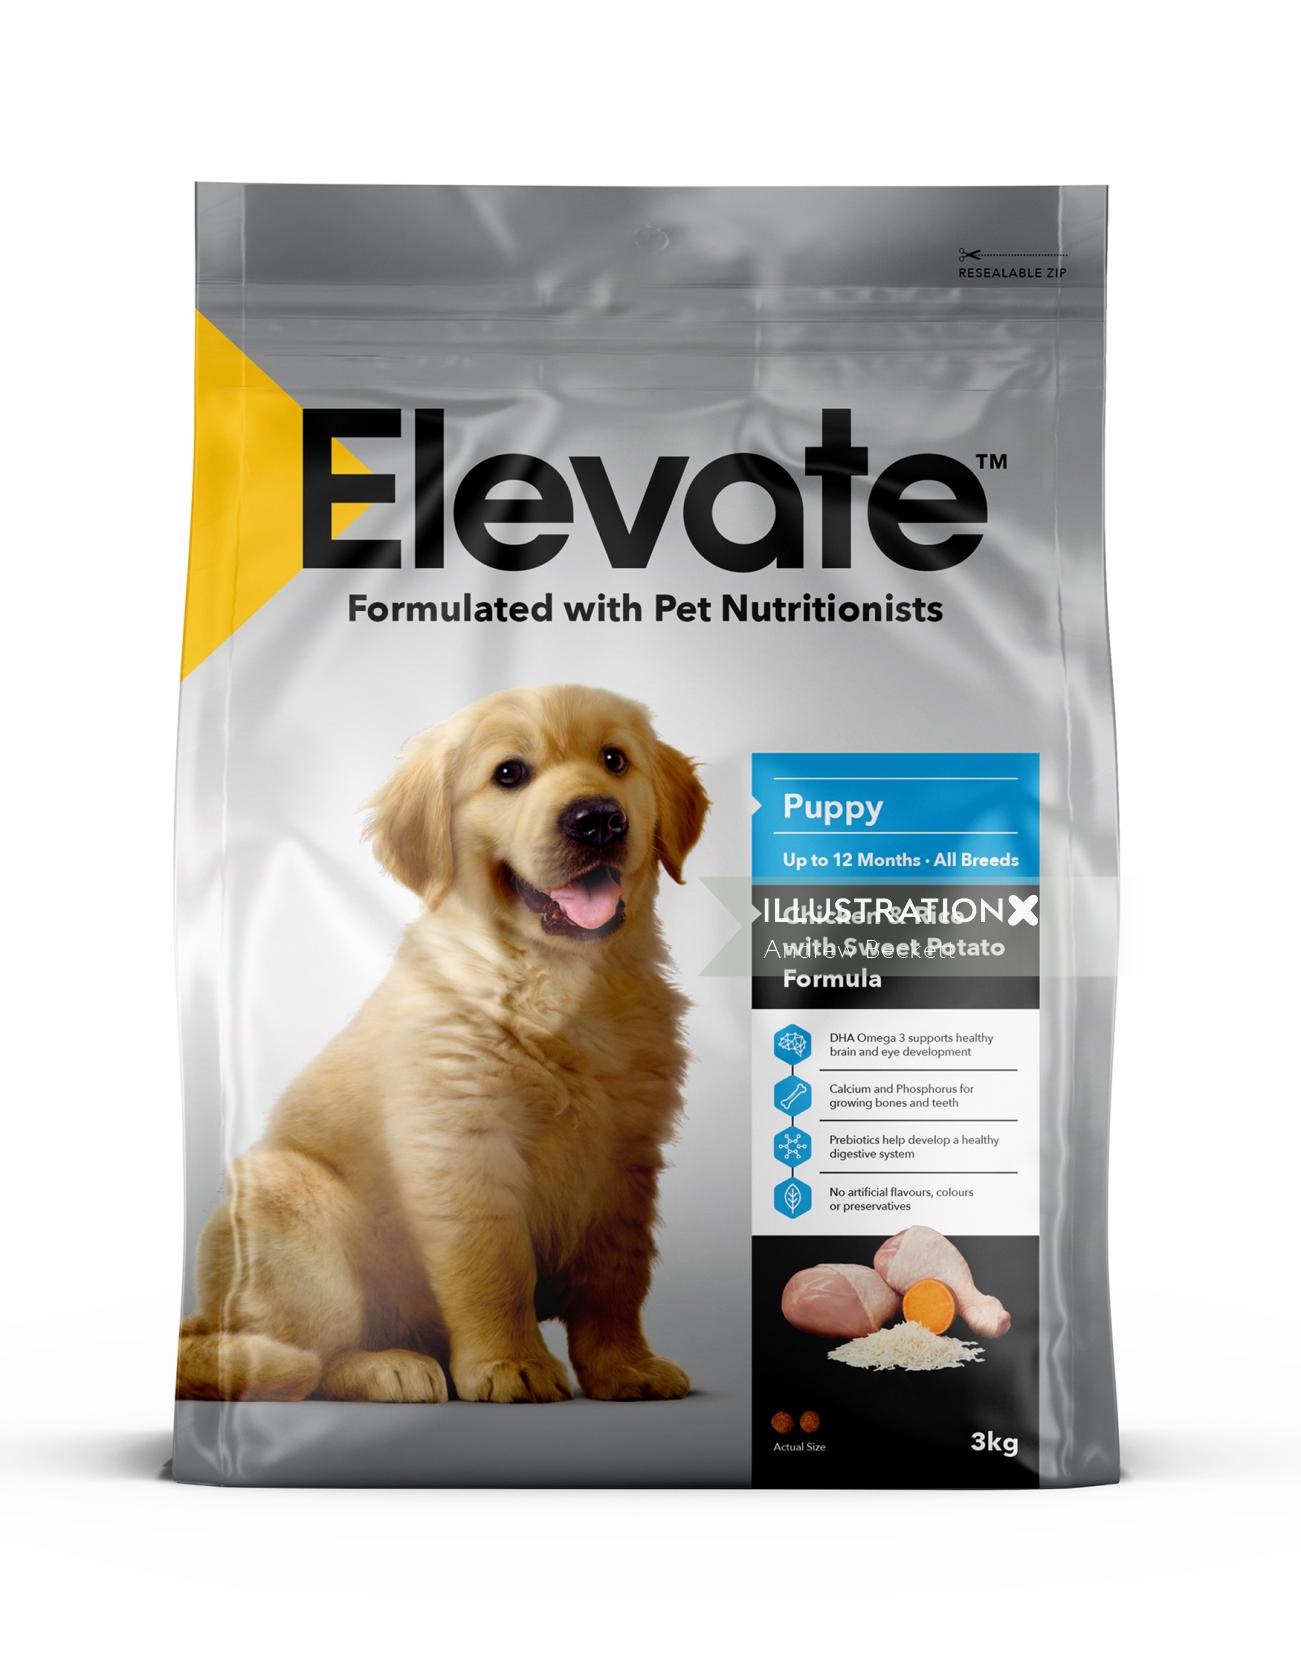 Packaging design of famous dog food "Elevate"